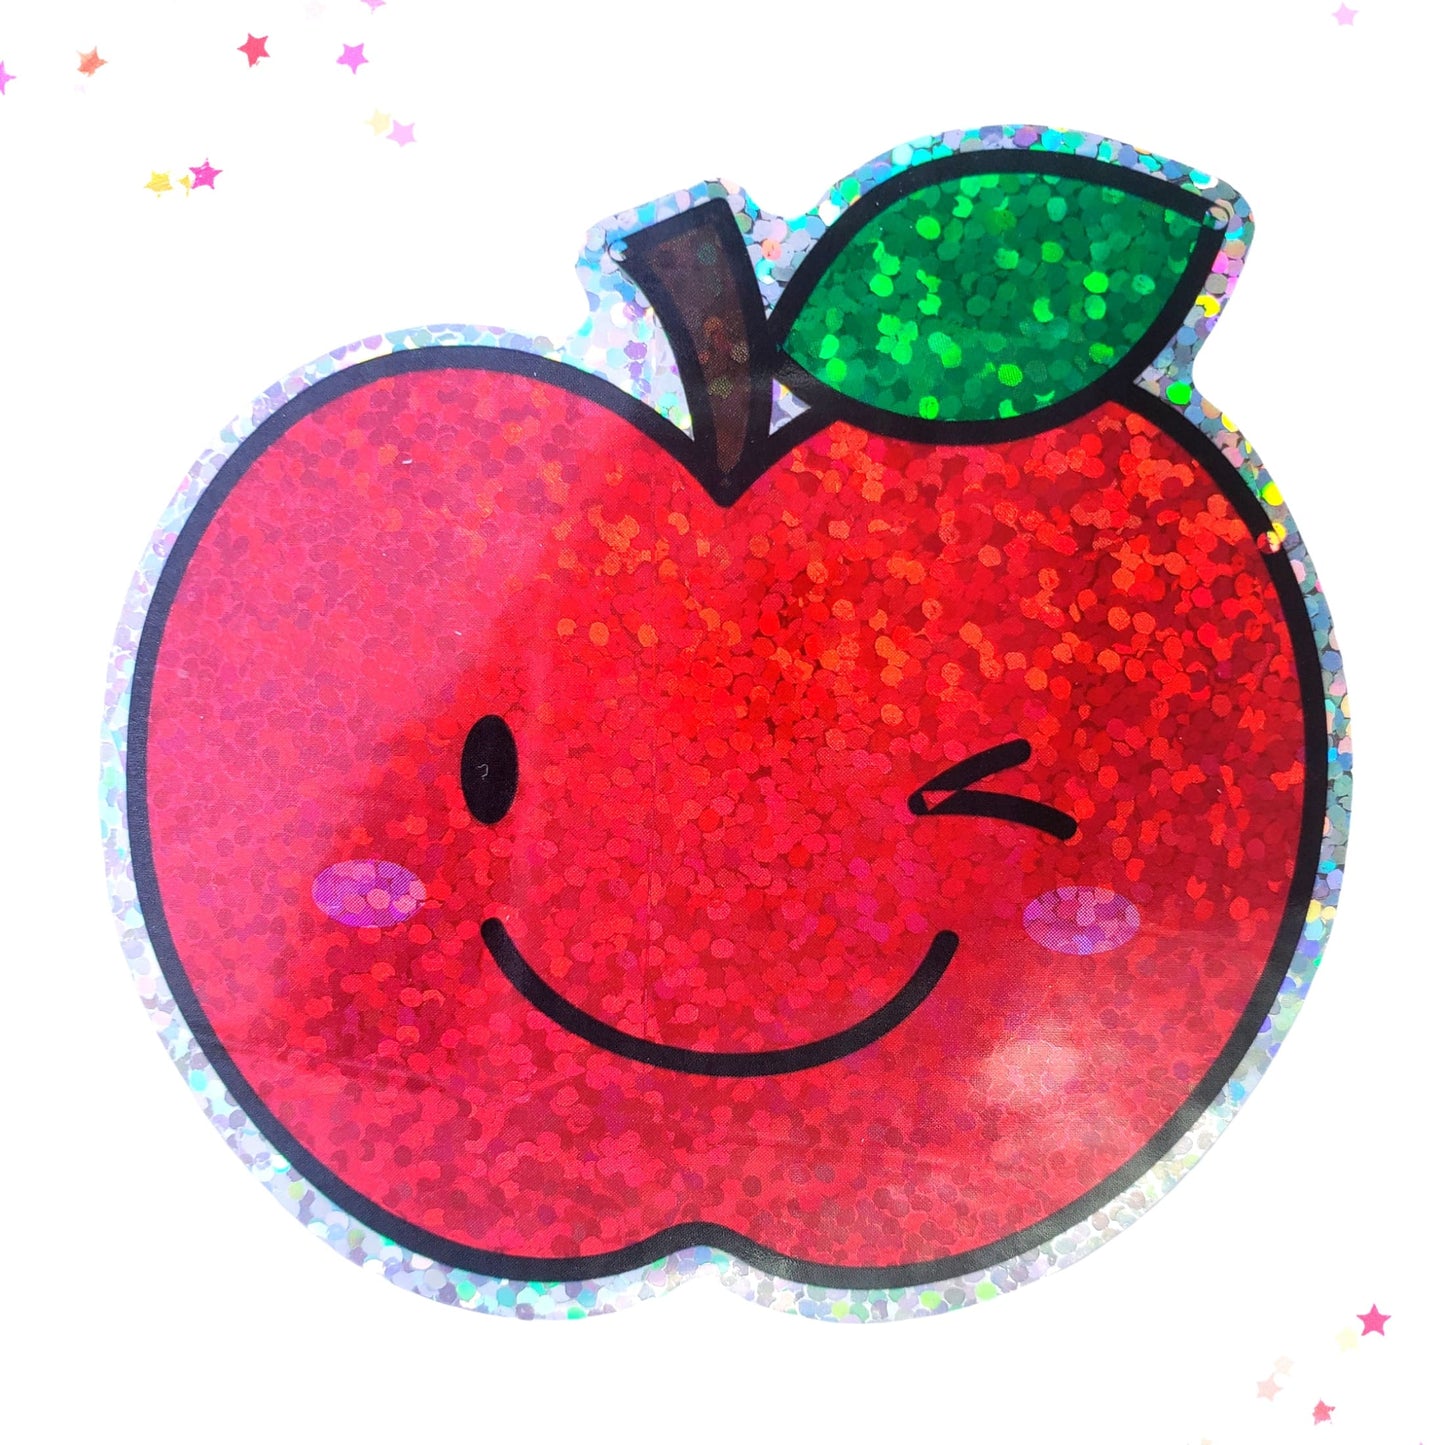 Premium Sticker - Sparkly Holographic Glitter Kawaii Red Apple from Confetti Kitty, Only 2.0